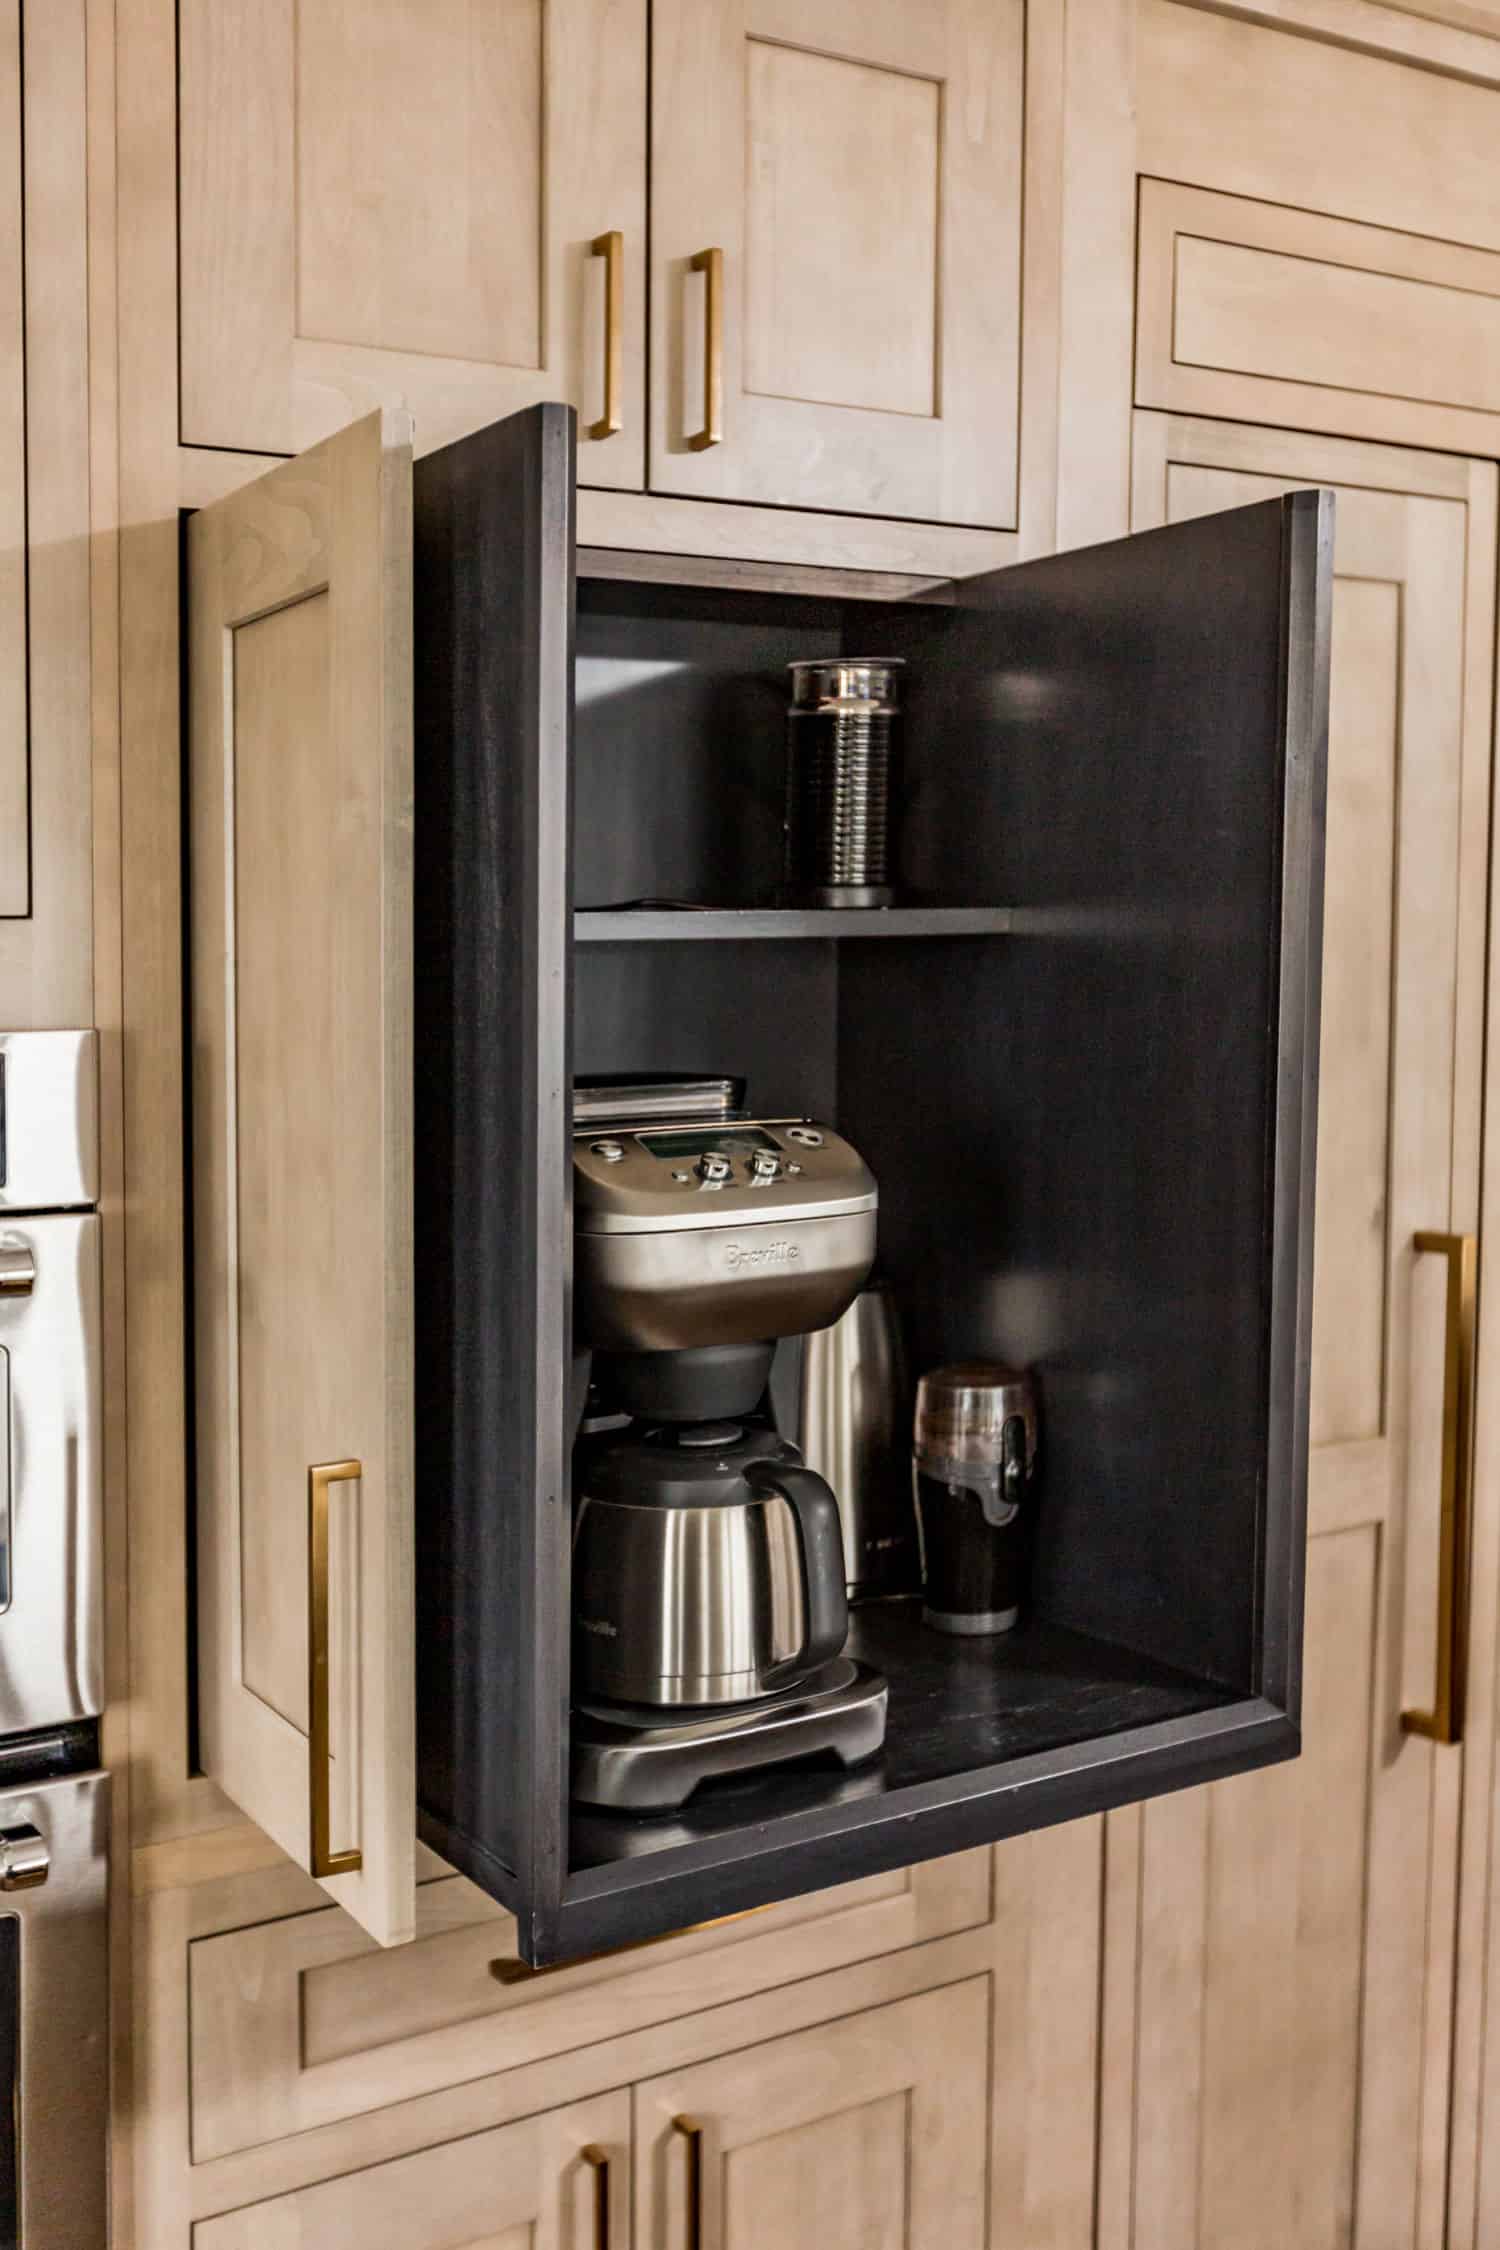 Nicholas Design Build | A coffee maker is in a cabinet in a remodelled kitchen.